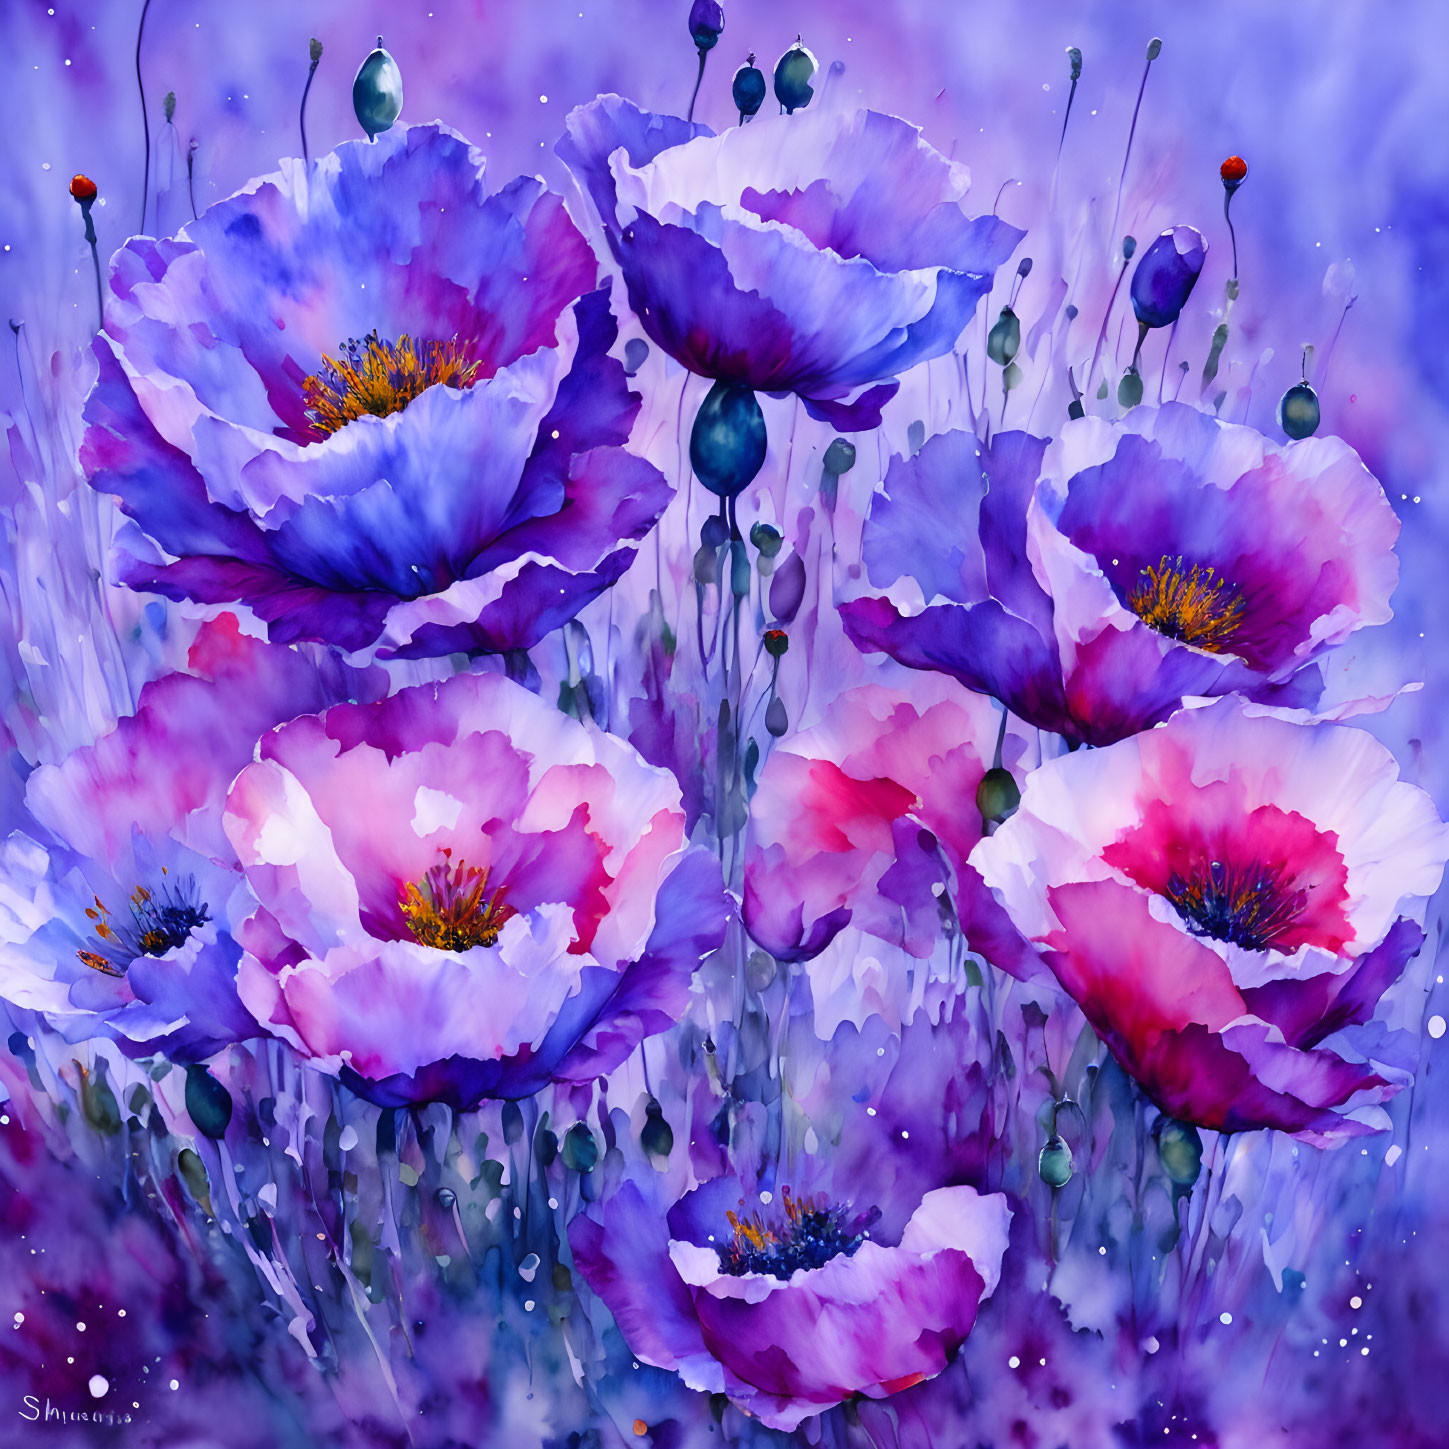 Colorful Painting of Purple and Pink Poppies on Dreamy Background